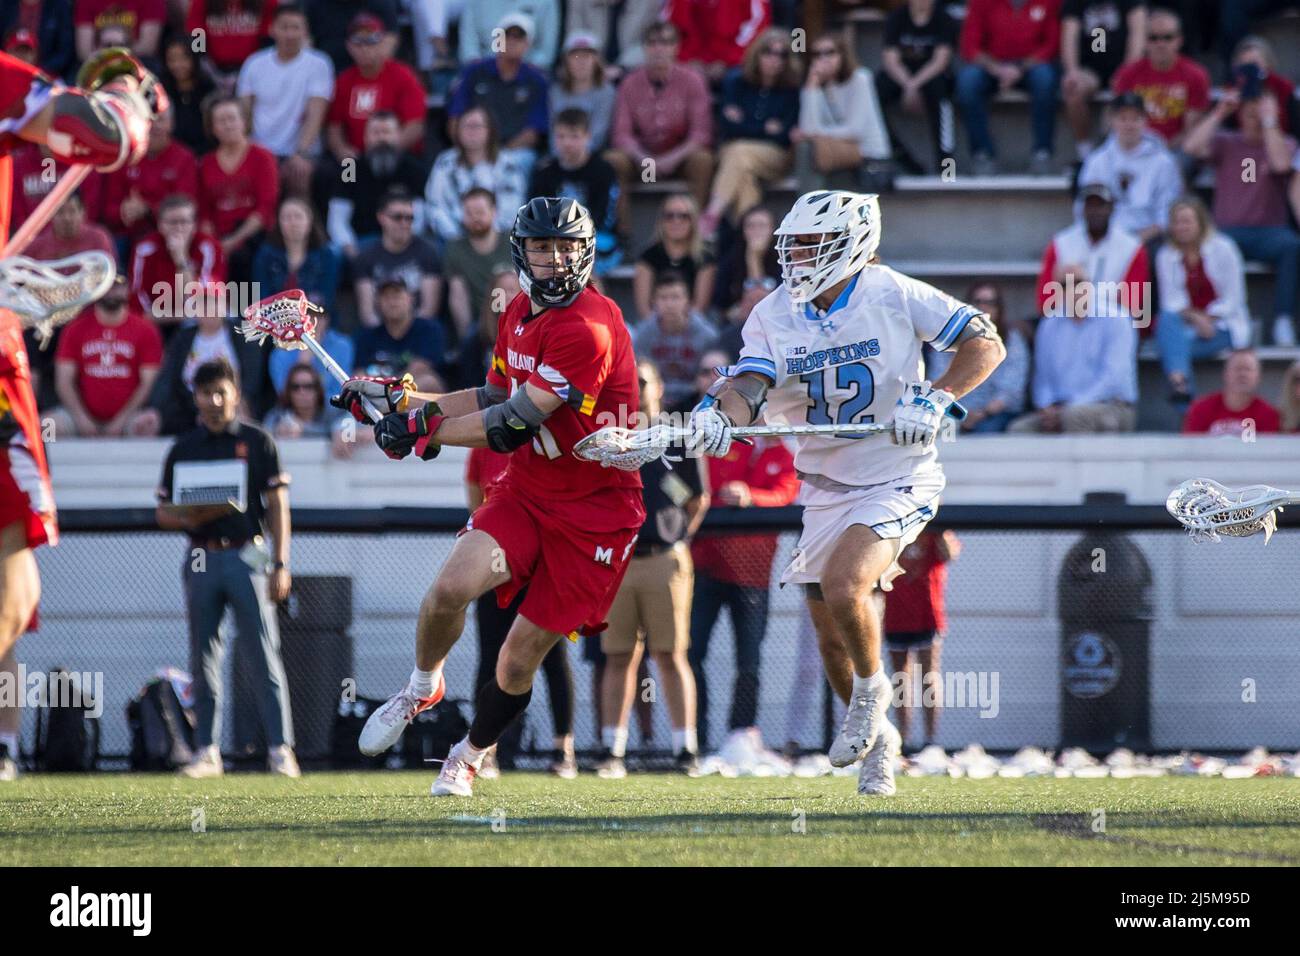 April 23, 2022: Maryland midfielder Jack Brennan (41) attacks the net and scores with Johns Hopkins defender/midfielder Brett Martin (12) on defense during the ncaa men's lacrosse regular season finale between the Maryland Terrapins and the Johns Hopkins Blue Jays at Homewood Field in Baltimore, Maryland Photographer: Cory Royster Stock Photo